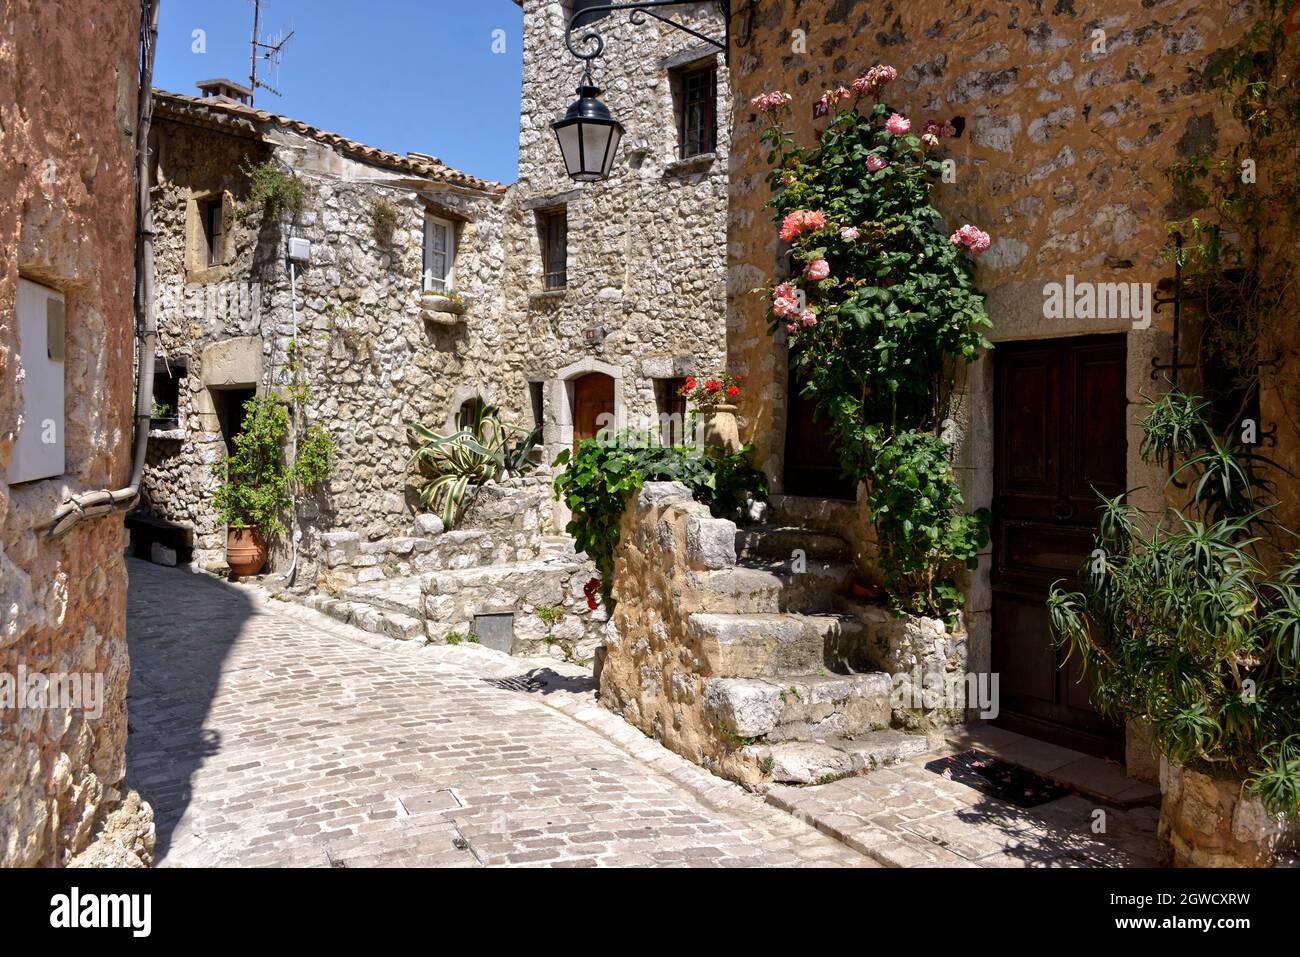 Typical street of village Tourrettes-sur-Loup, a commune in the Alpes-Maritimes department in southeastern France Stock Photo